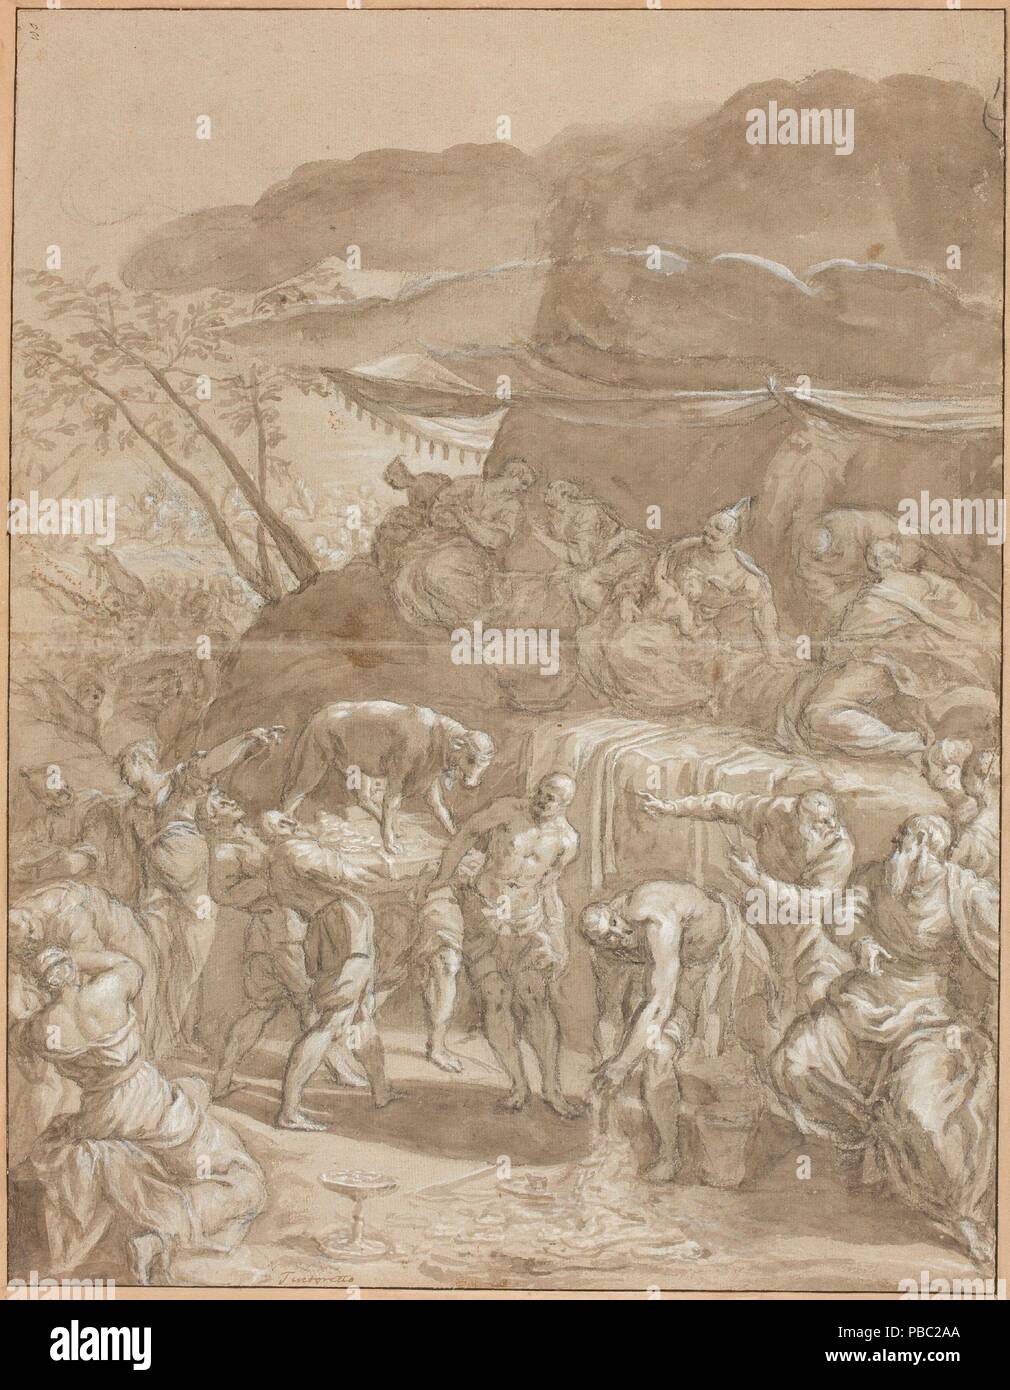 Anonymous / 'The Worship of the Golden Calf'. Ca. 1600. Grey wash, White lead, Pencil ground on brown paper. Museum: Museo del Prado, Madrid, España. Stock Photo